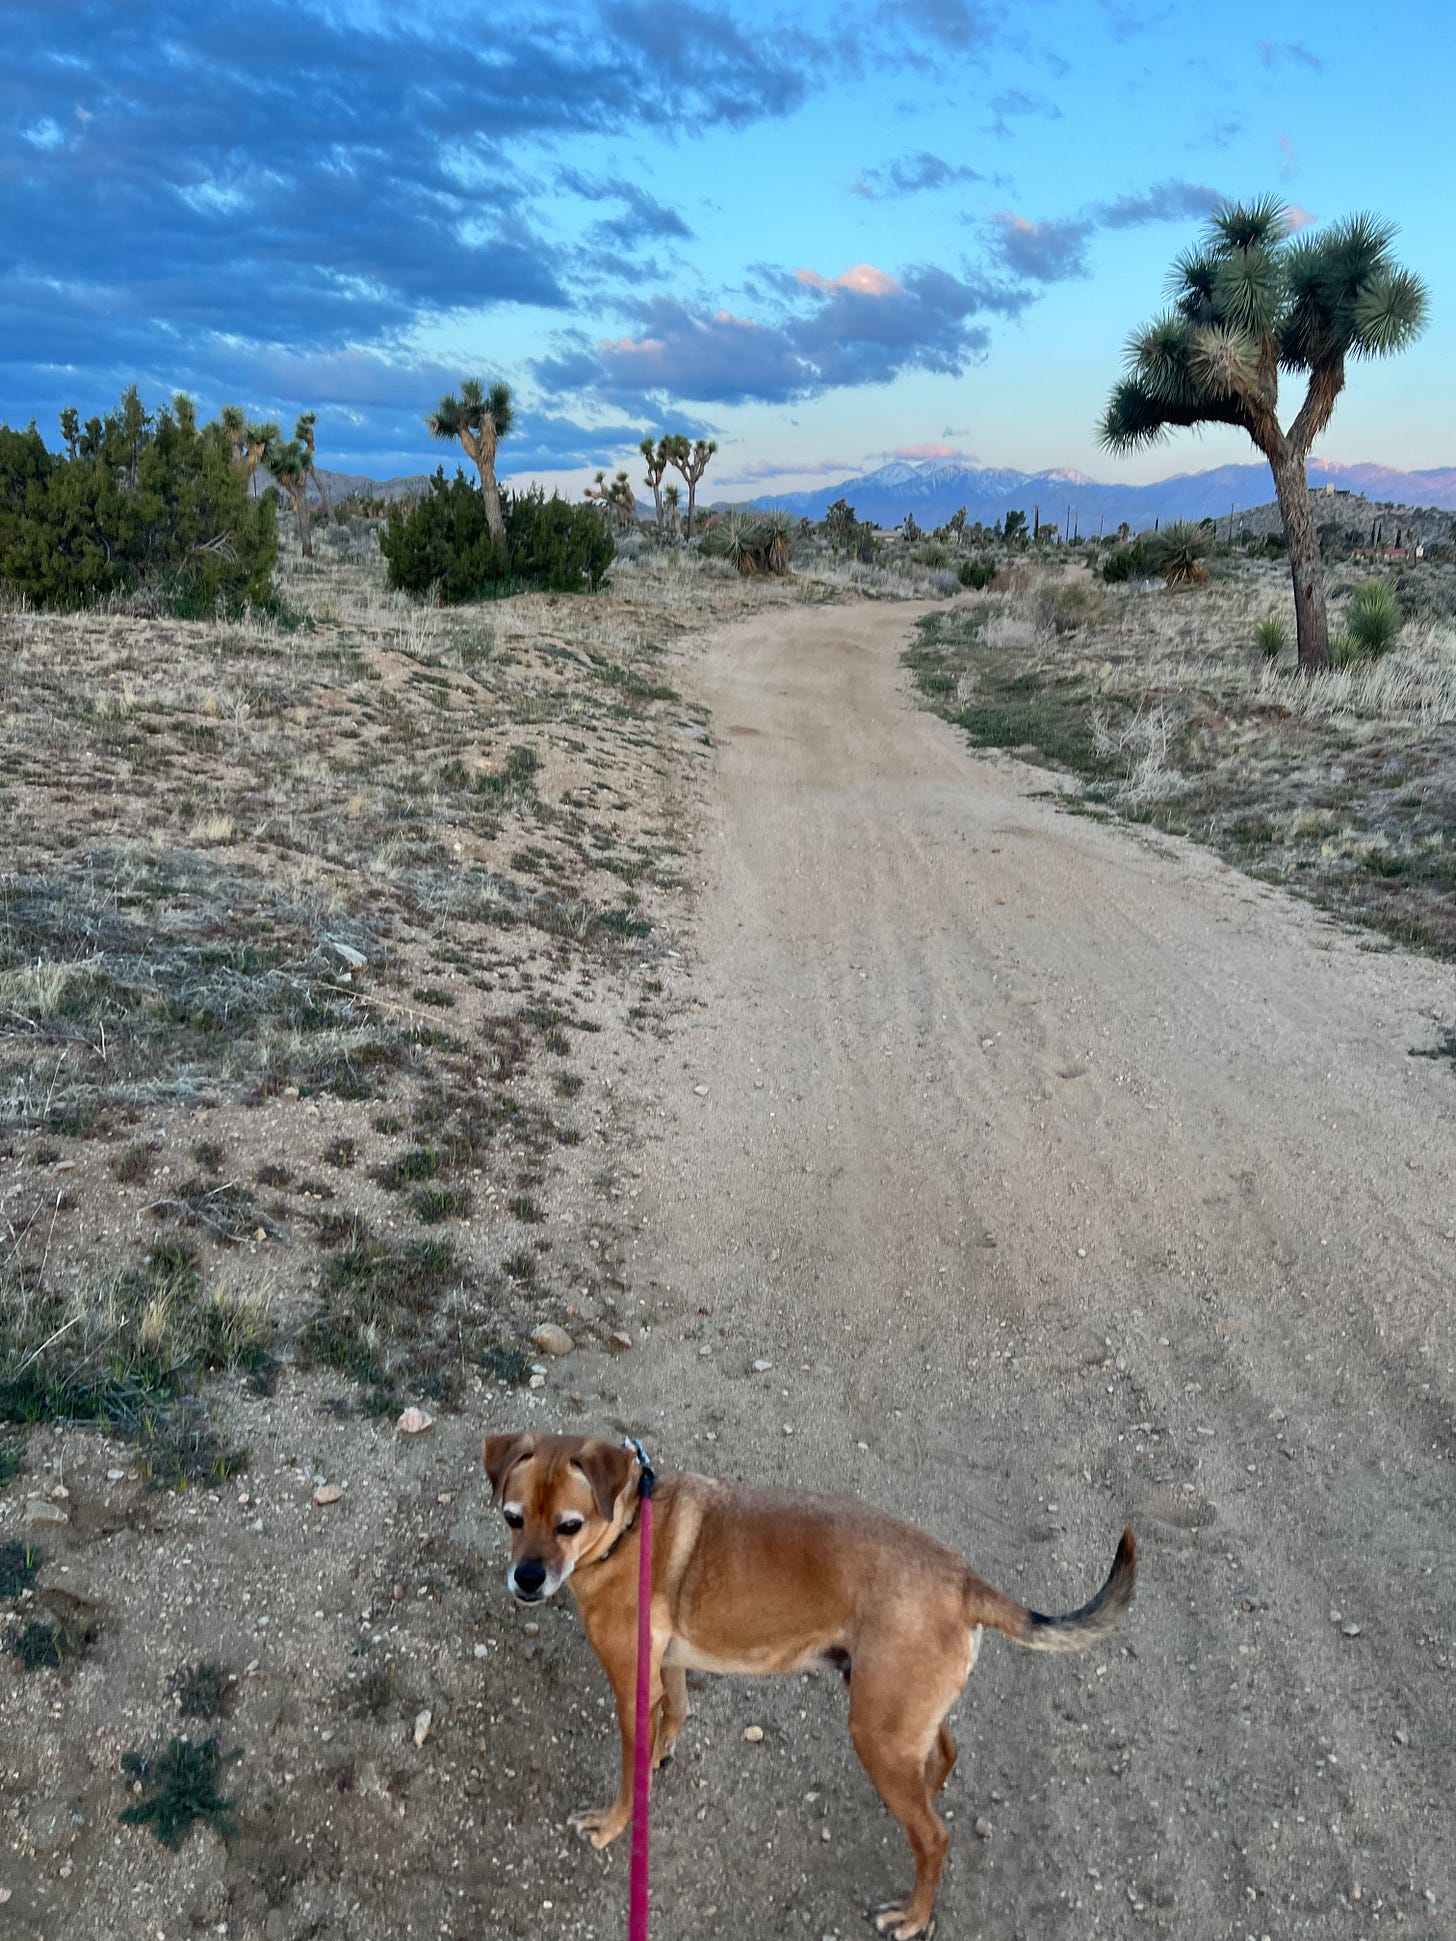 A brown dog stands in the middle of a sandy trail on a leash during a spectacular sunrise. Joshua trees are on either side and the San Bernardino Mountains glow in the distance.